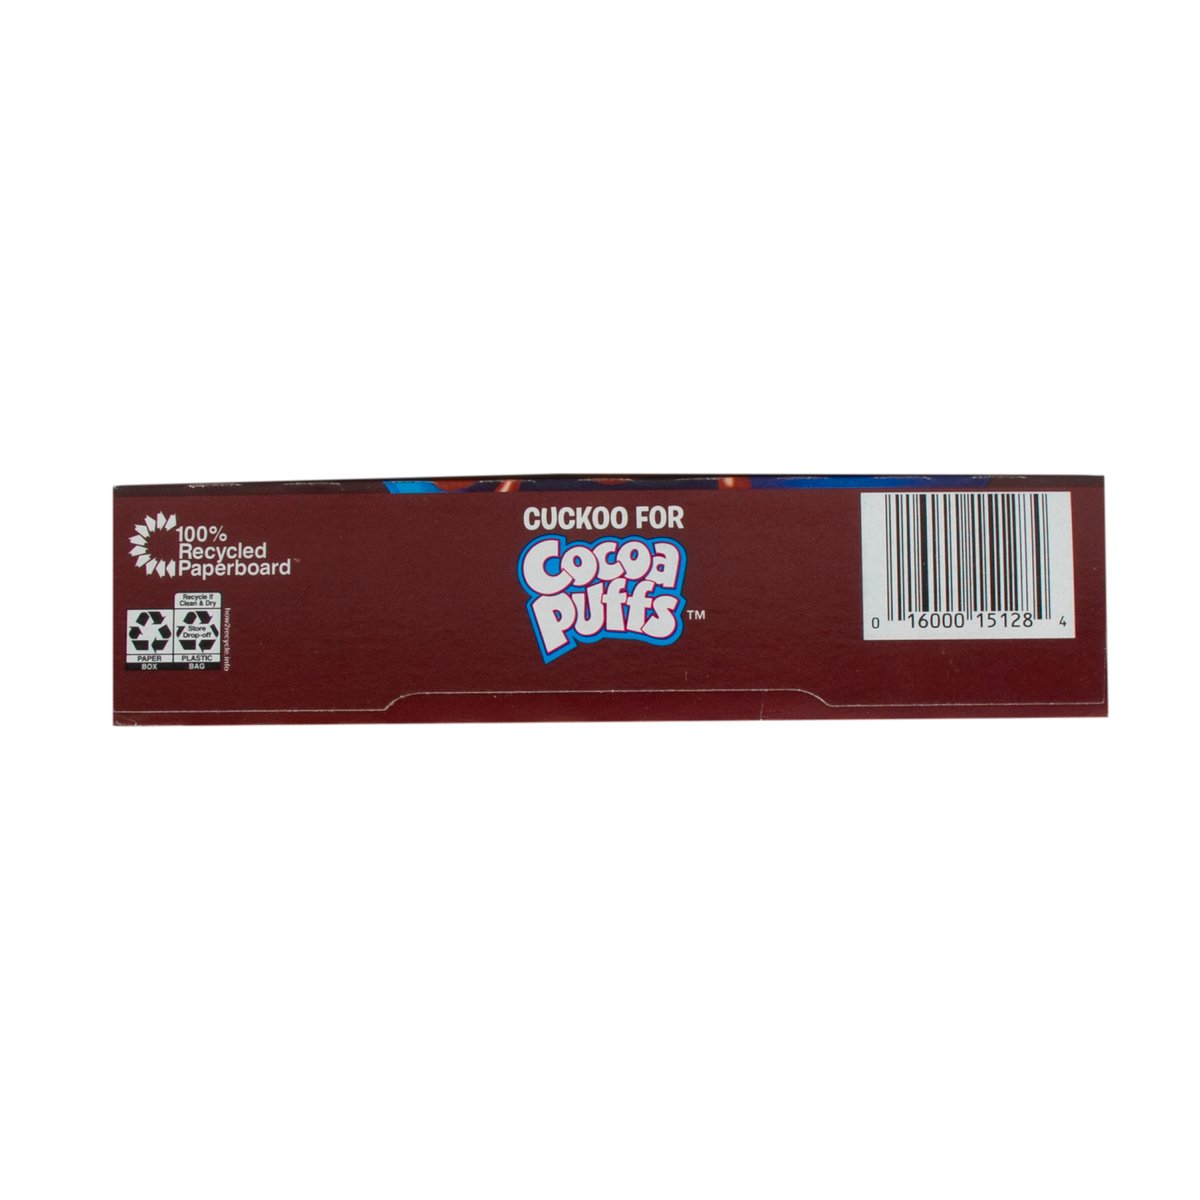 General Mills Cocoa Puffs Cereal 294g